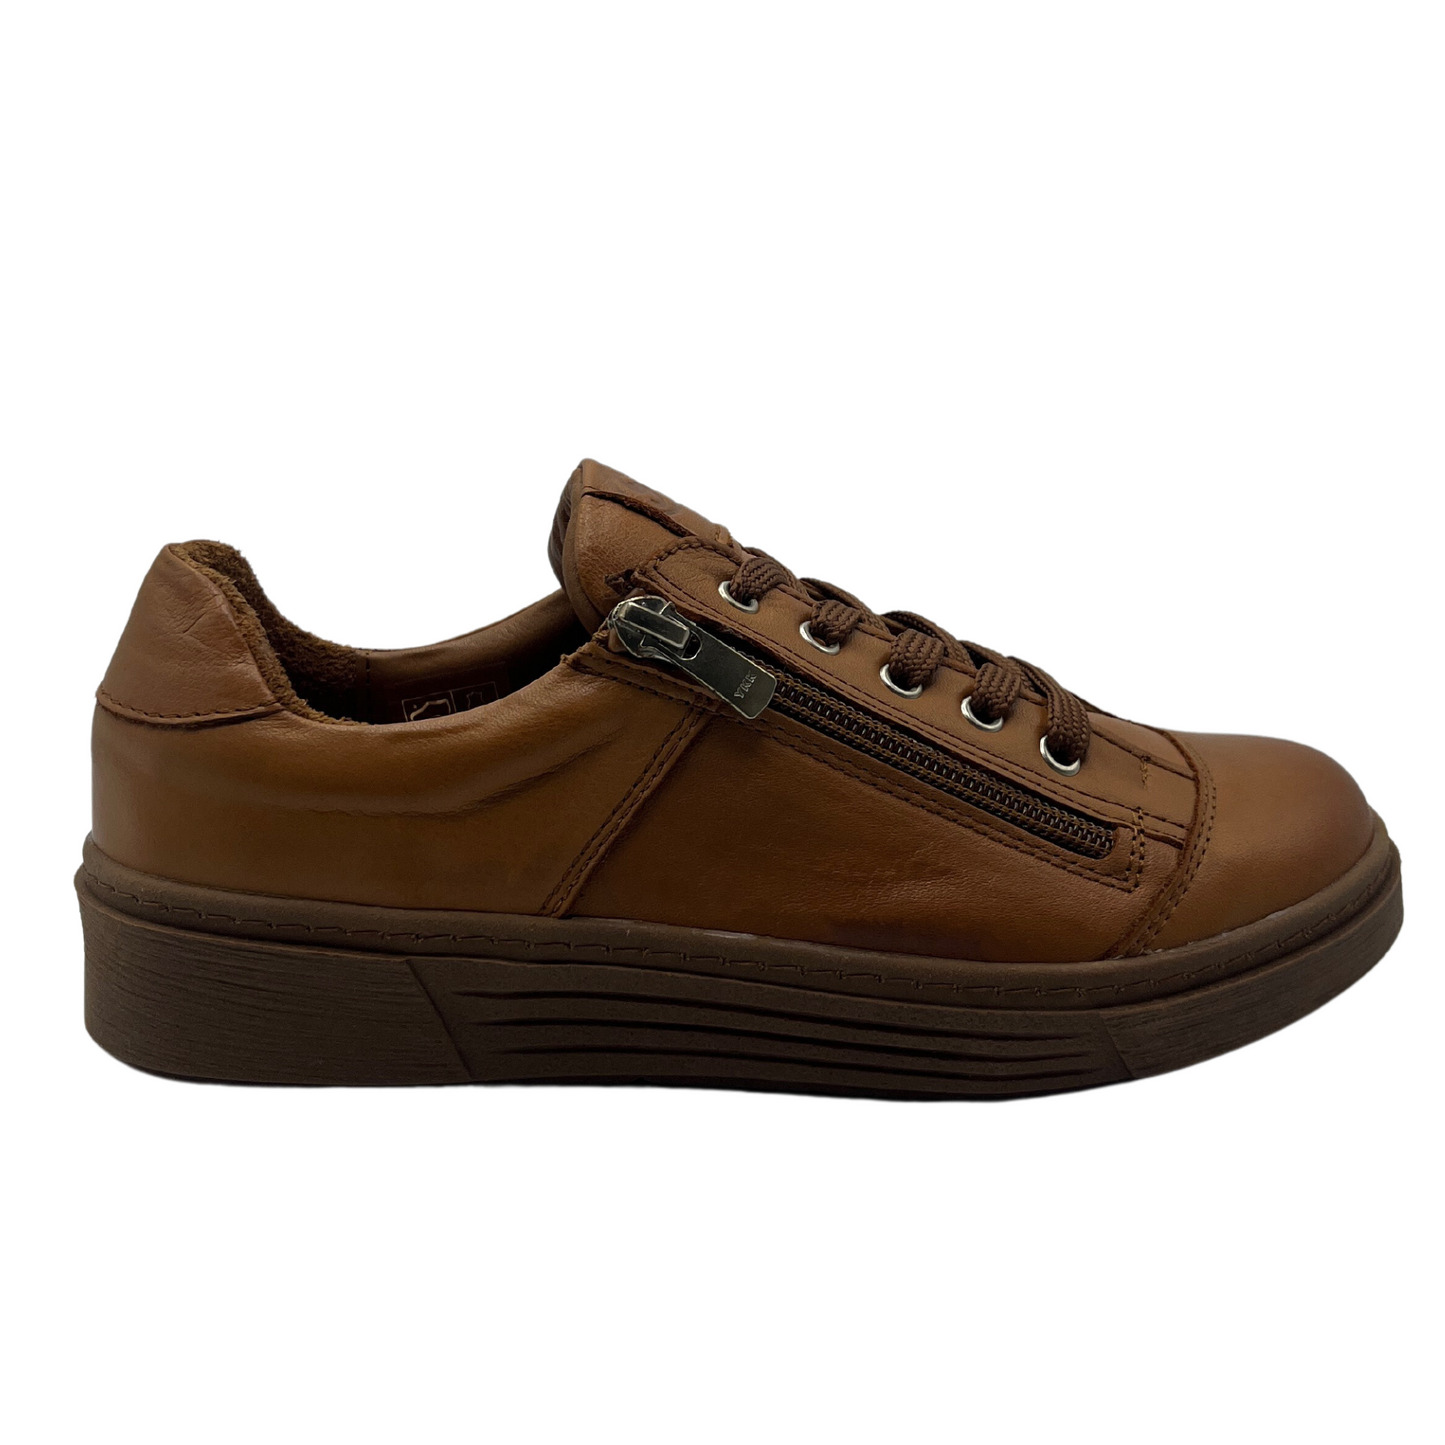 Right facing view of brown leather sneaker with leather lining and side zipper closure